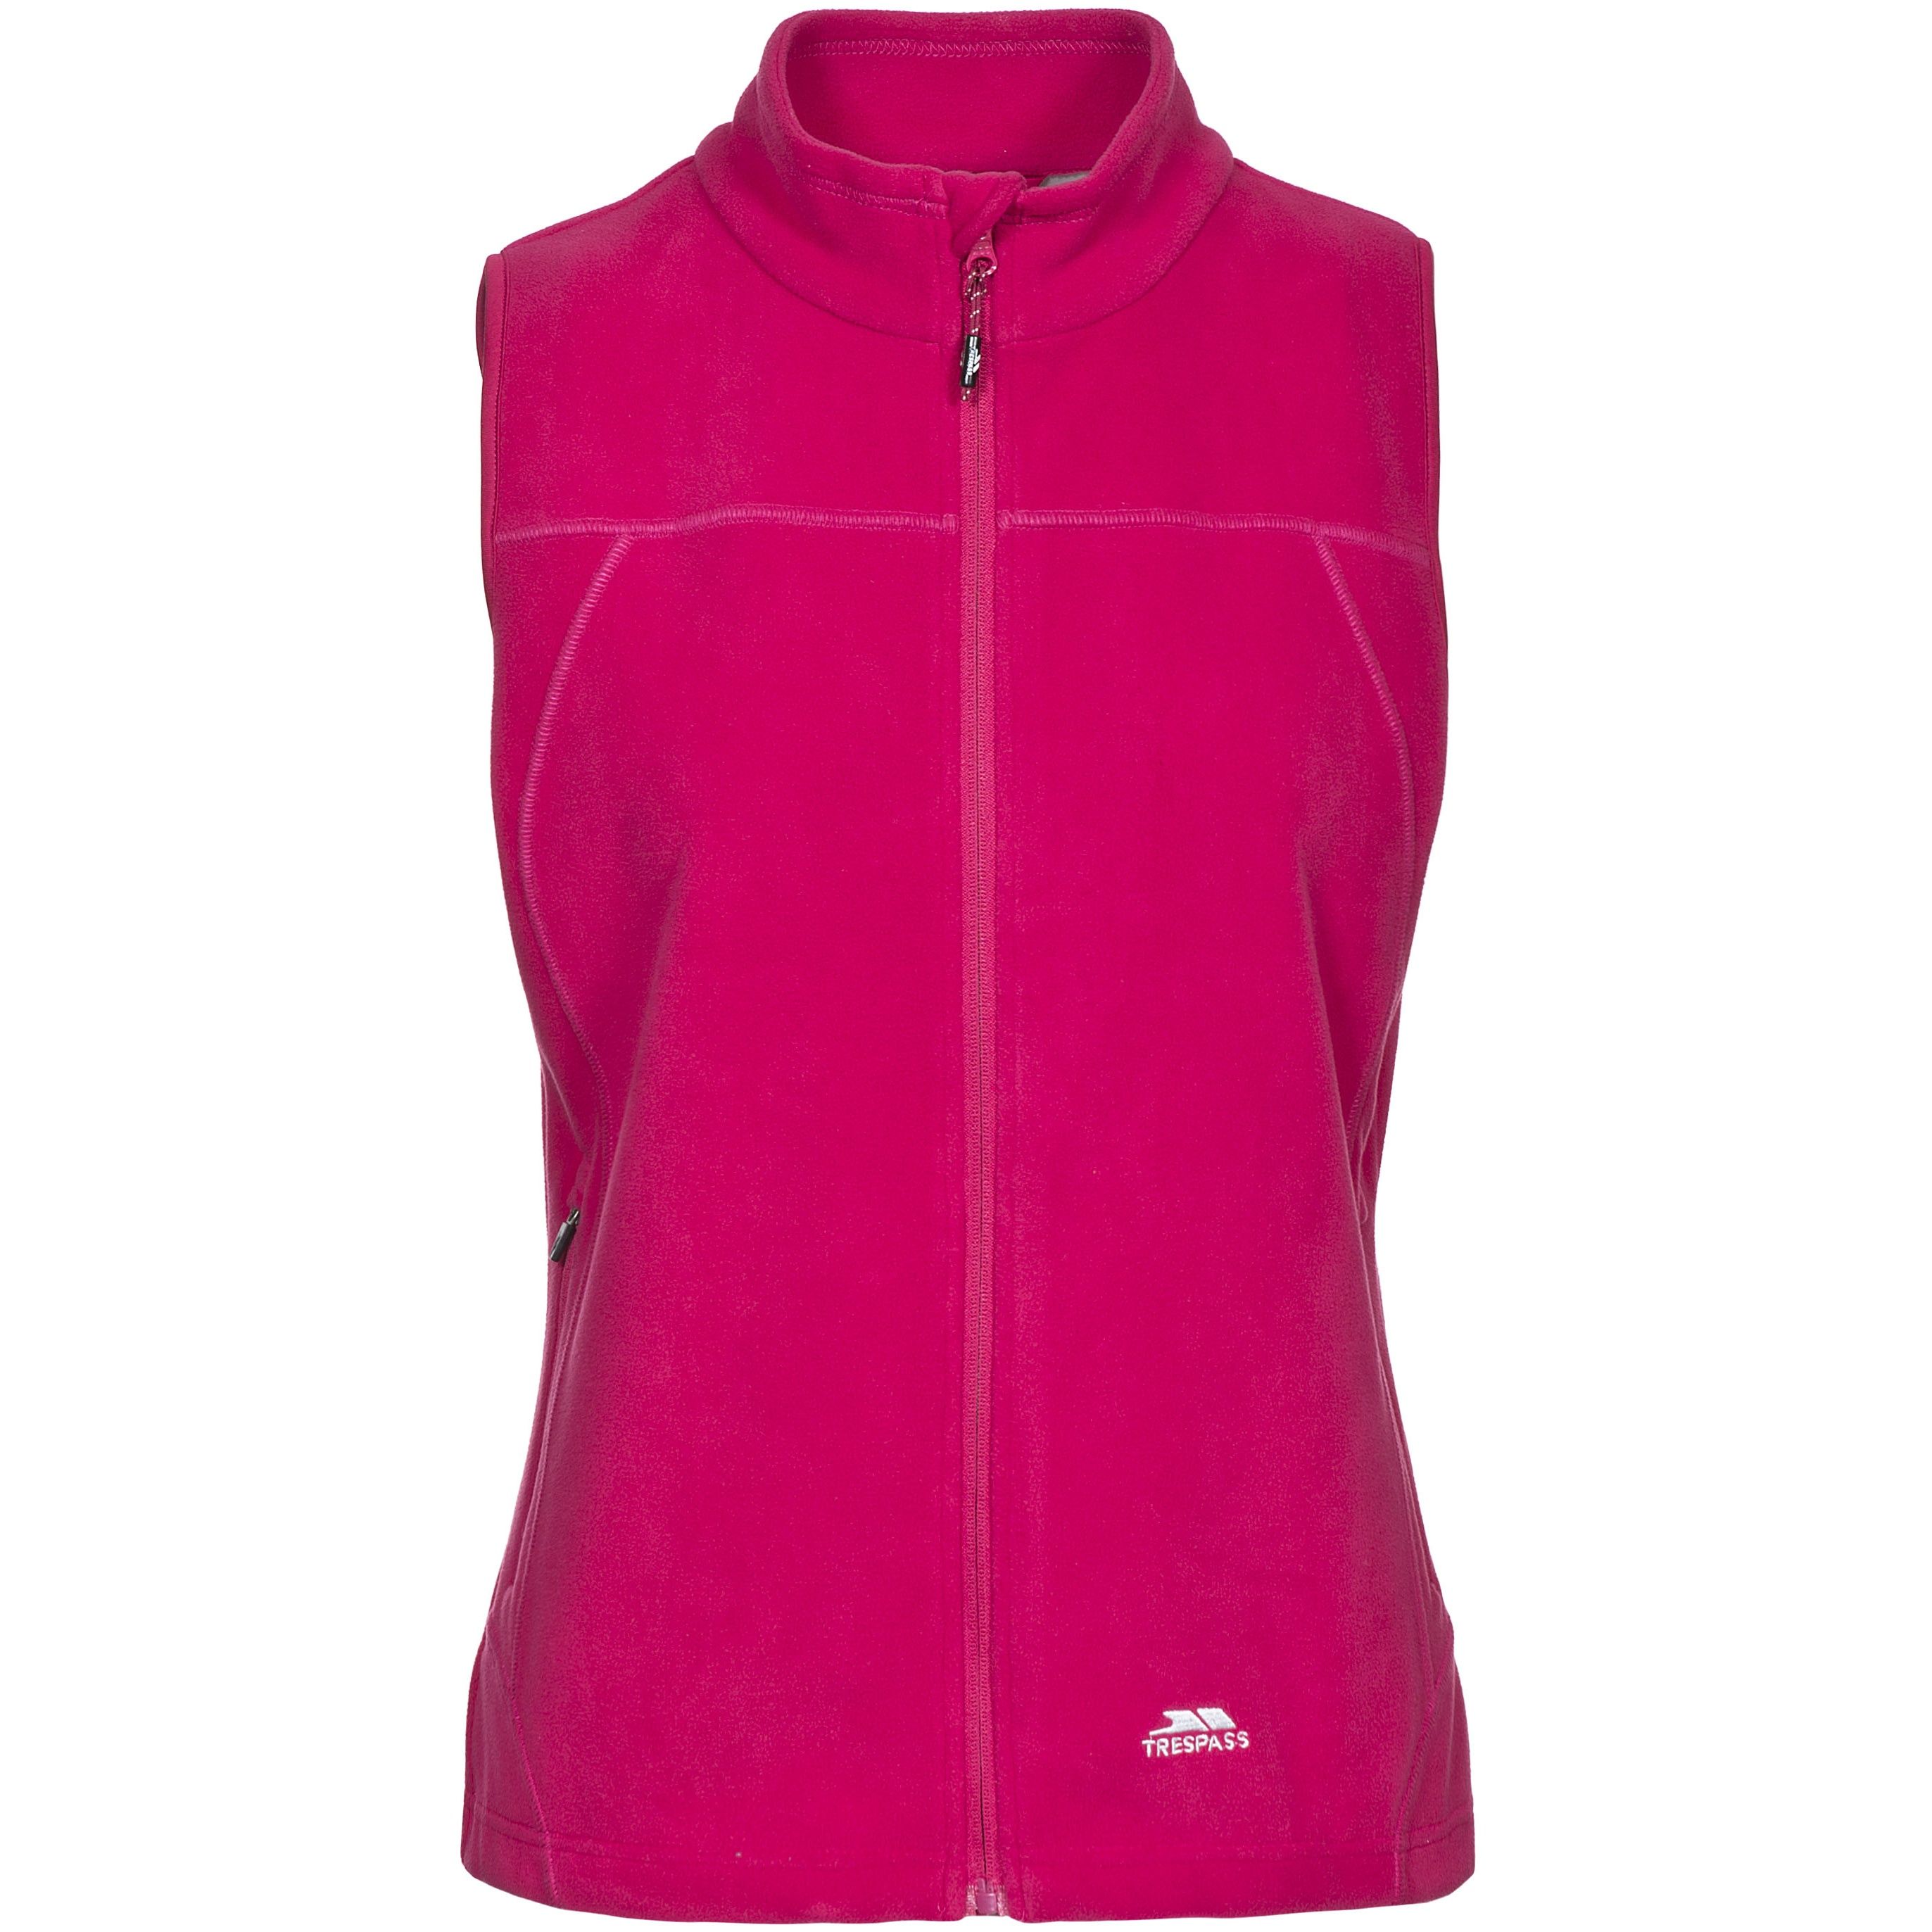 Microfleece with contrast interlock backing. 2 zip pockets. Low profile zips. Inner zip facing. Coverstitch detail. Adjustable drawcord hem. Stretch binding at armhole. Airtrap. 100% Polyester. Trespass Womens Chest Sizing (approx): XS/8 - 32in/81cm, S/10 - 34in/86cm, M/12 - 36in/91.4cm, L/14 - 38in/96.5cm, XL/16 - 40in/101.5cm, XXL/18 - 42in/106.5cm.